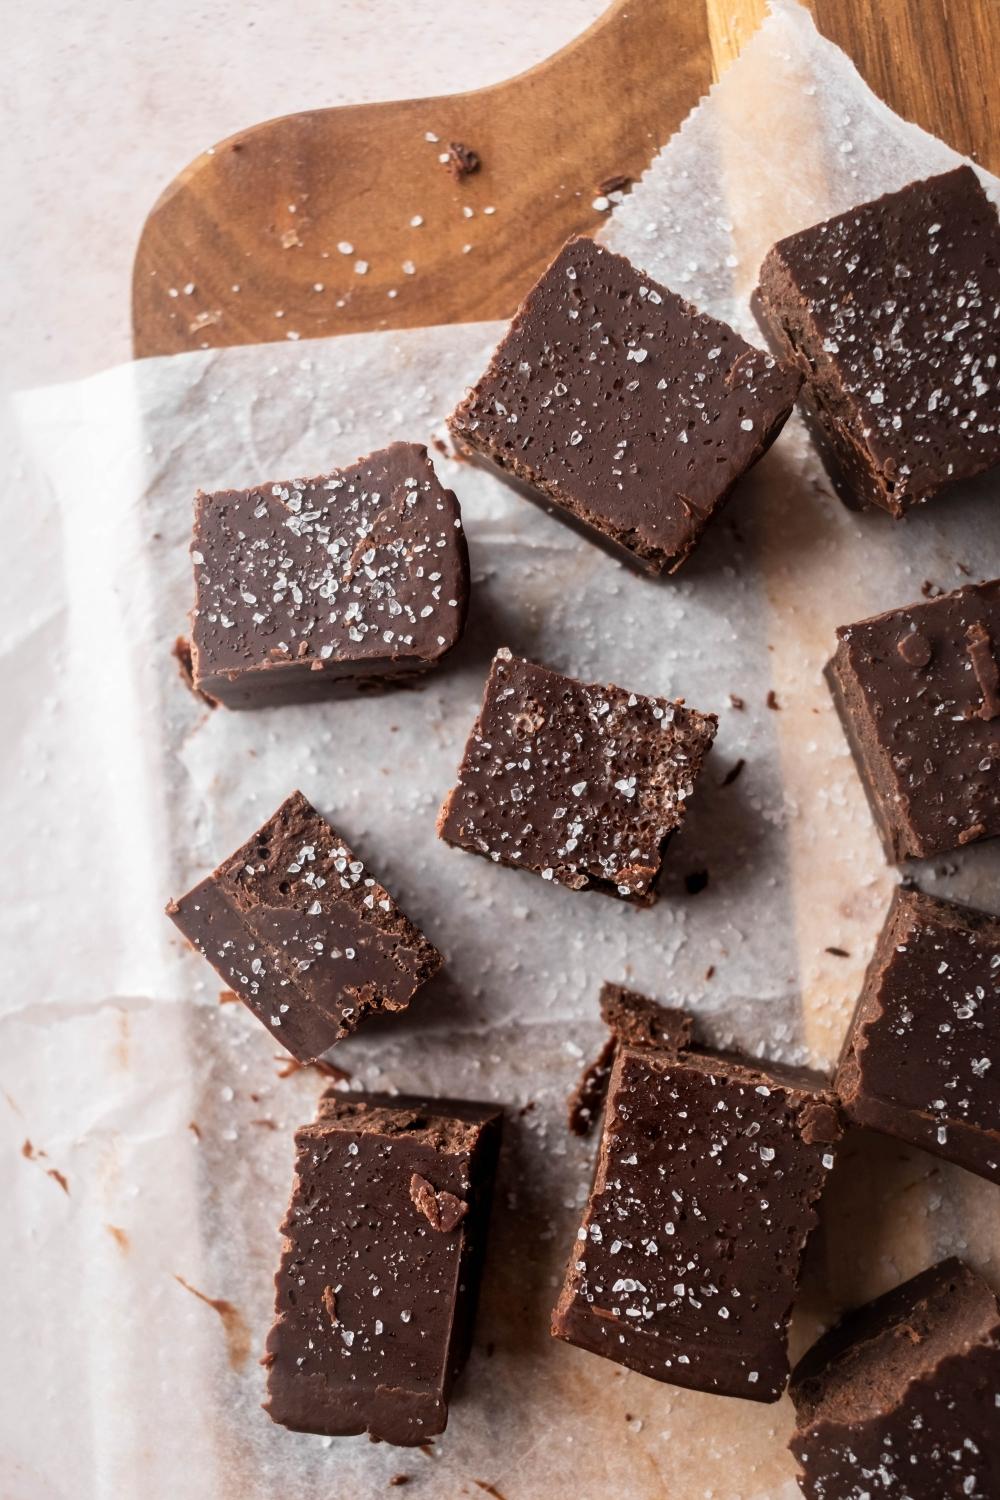 Two rows of three pieces of fudge on a piece of parchment paper on a wooden cutting board.